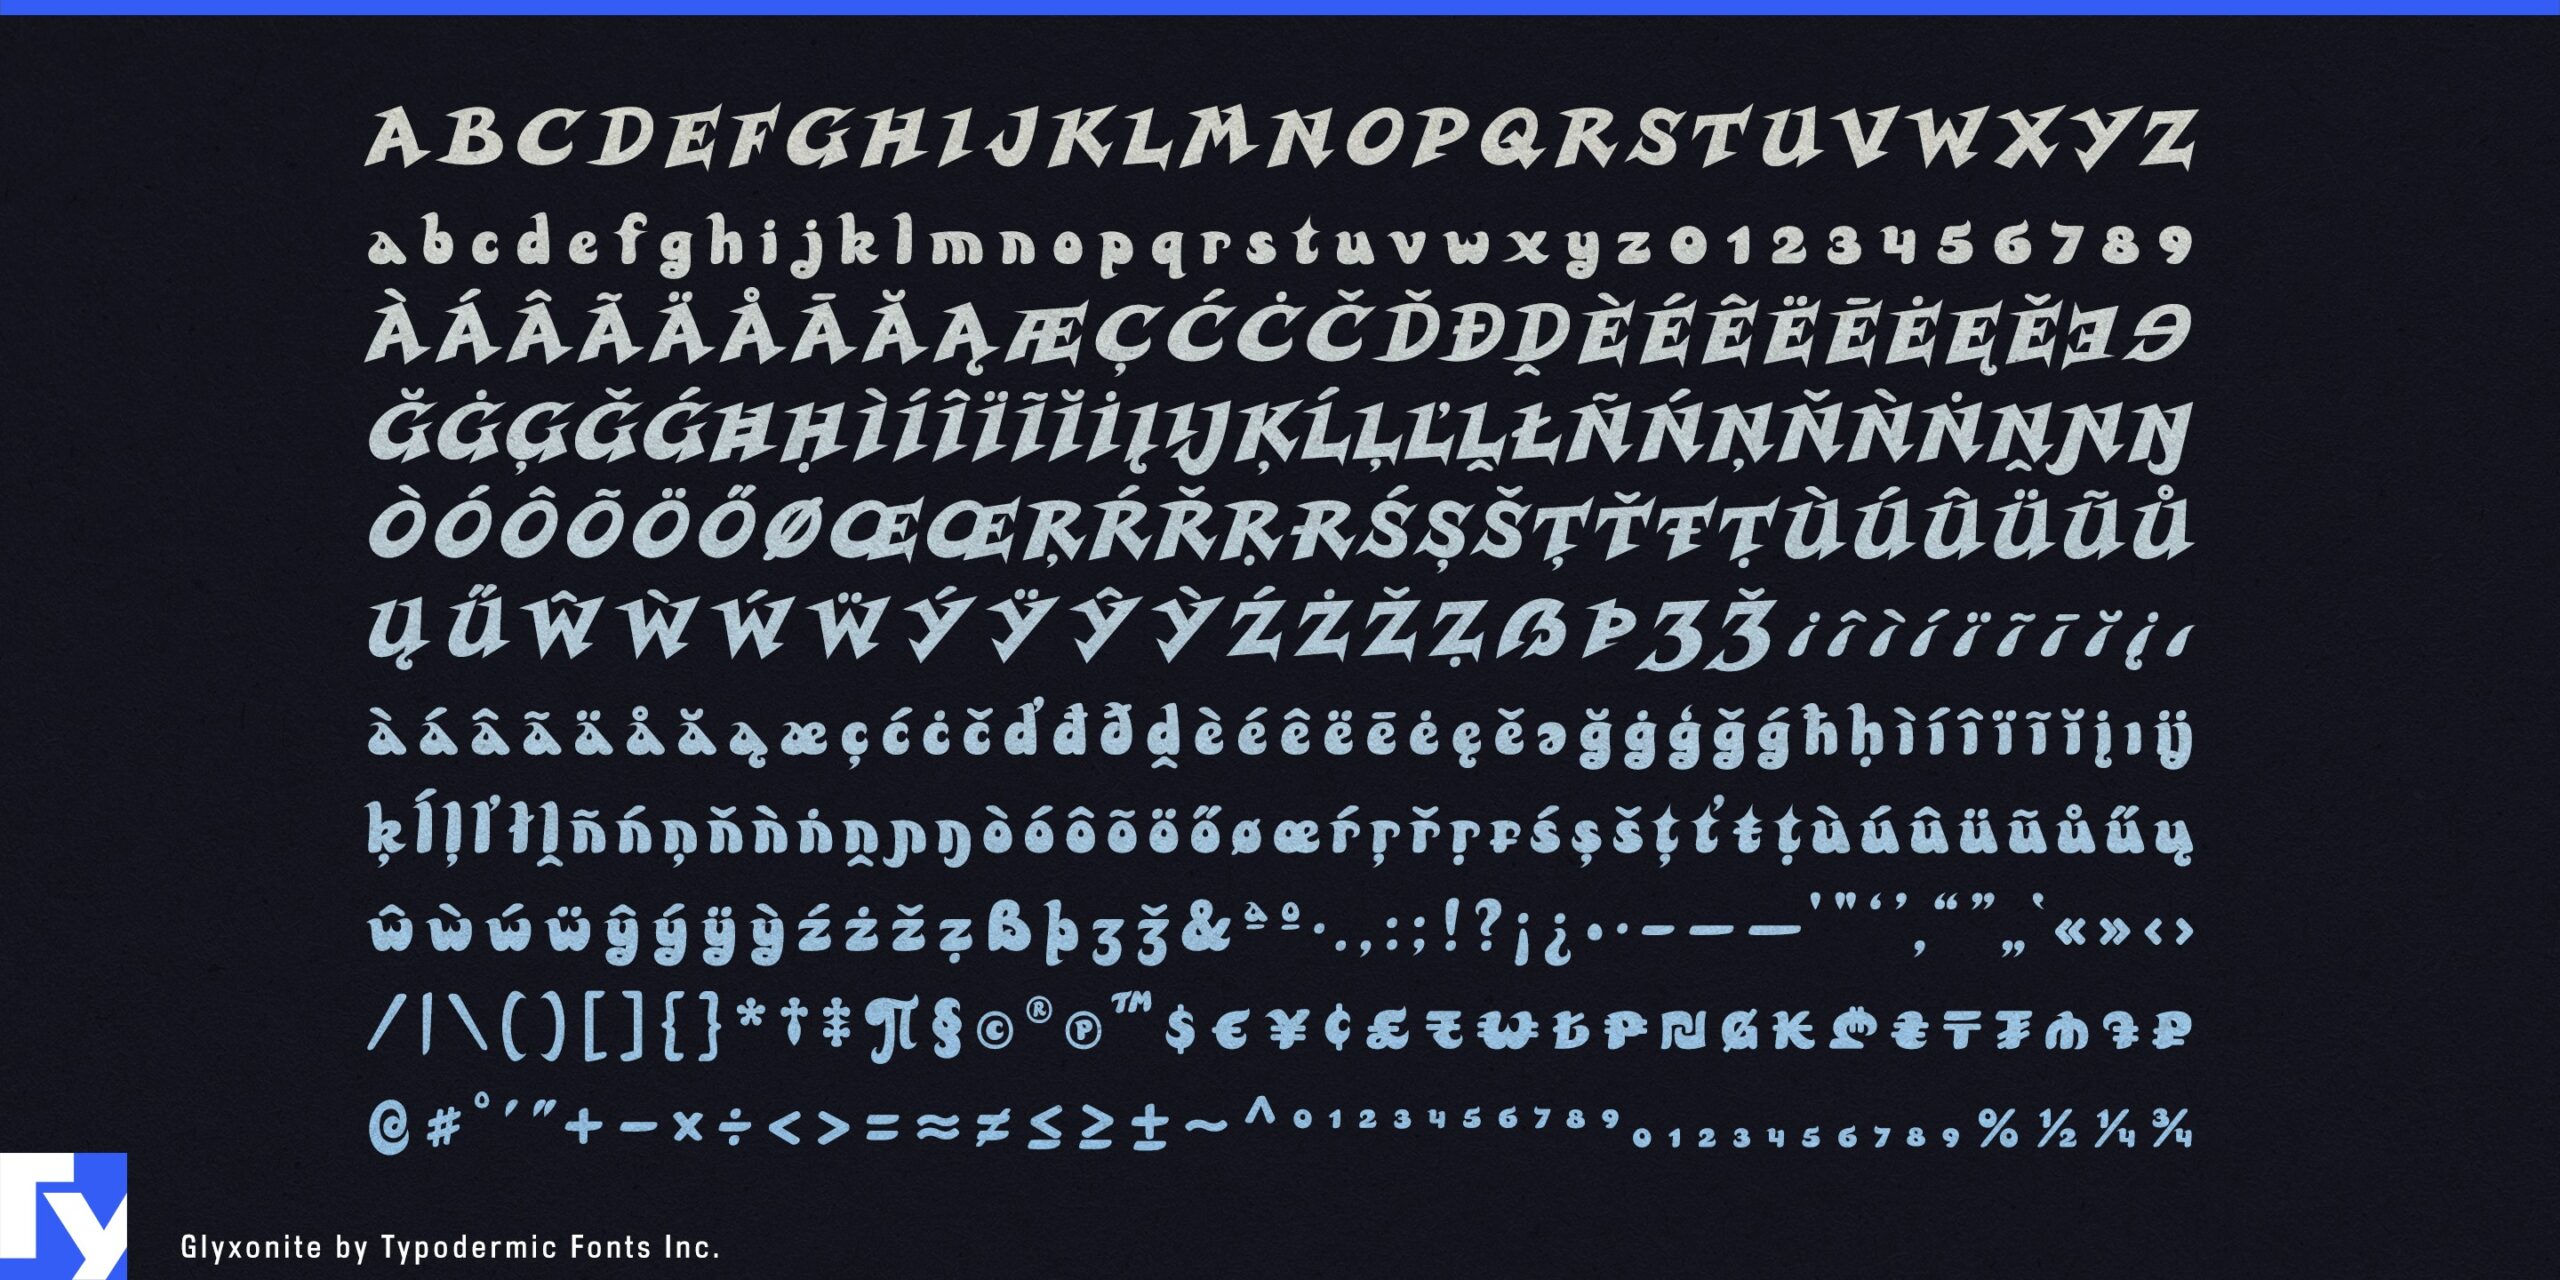 Bold and Gritty: Unleash the Power of Glyxonite Typeface